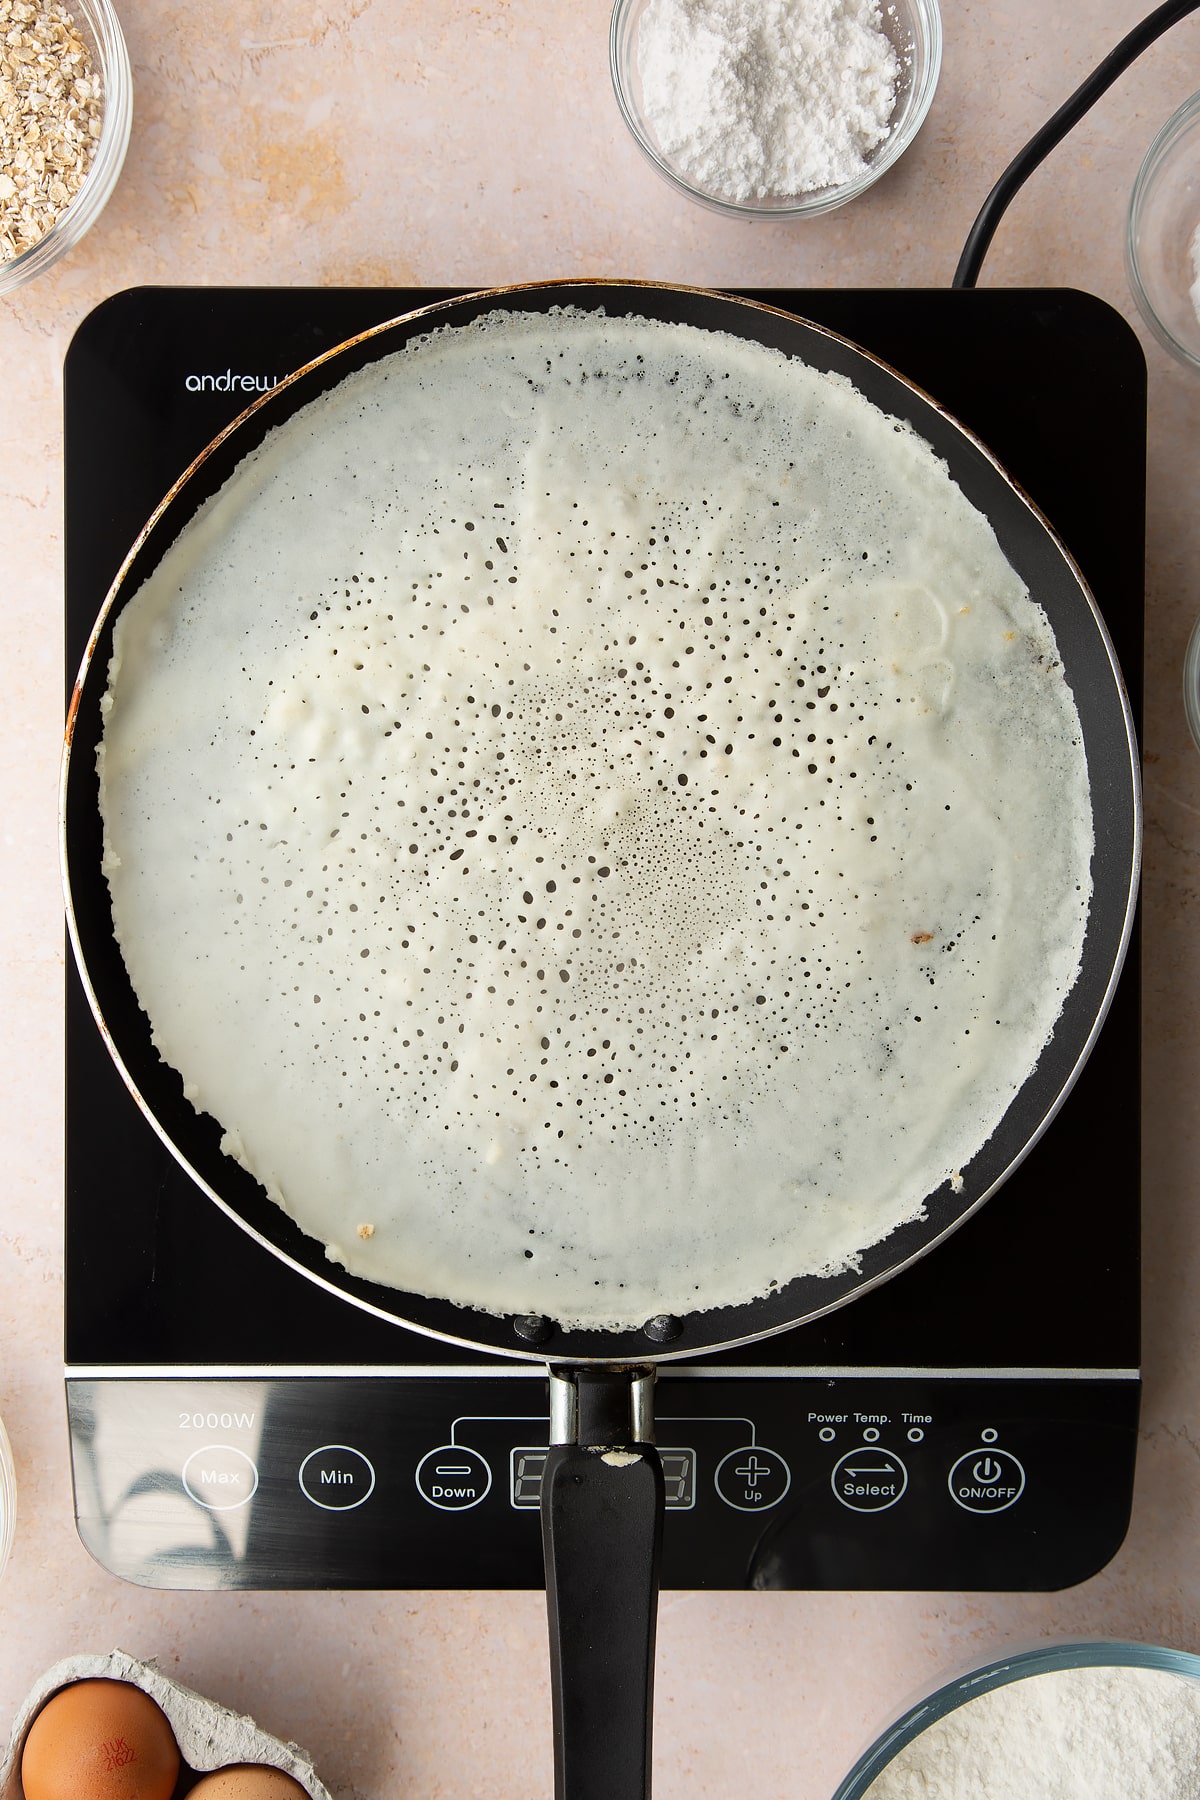 A thin layer of batter cooking in a crepe pan. Ingredients to make gluten free crepes surround the bowl.